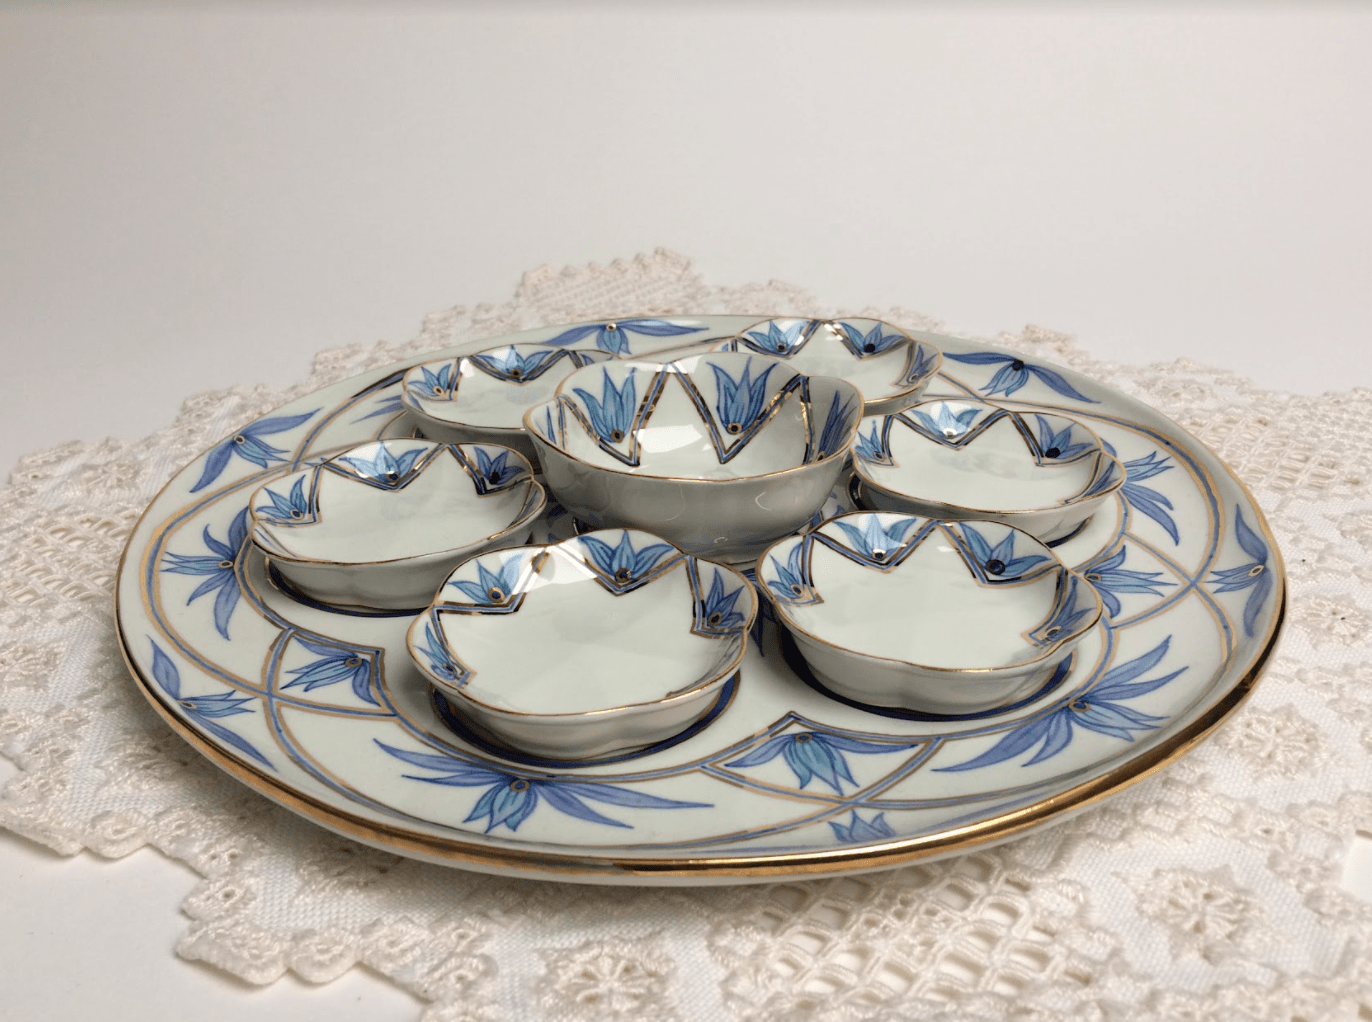 Judaica Hungarica Seder Plates Navy, Turquoise and Gold Floral Porcelain Seder Plate and Salt Bowl